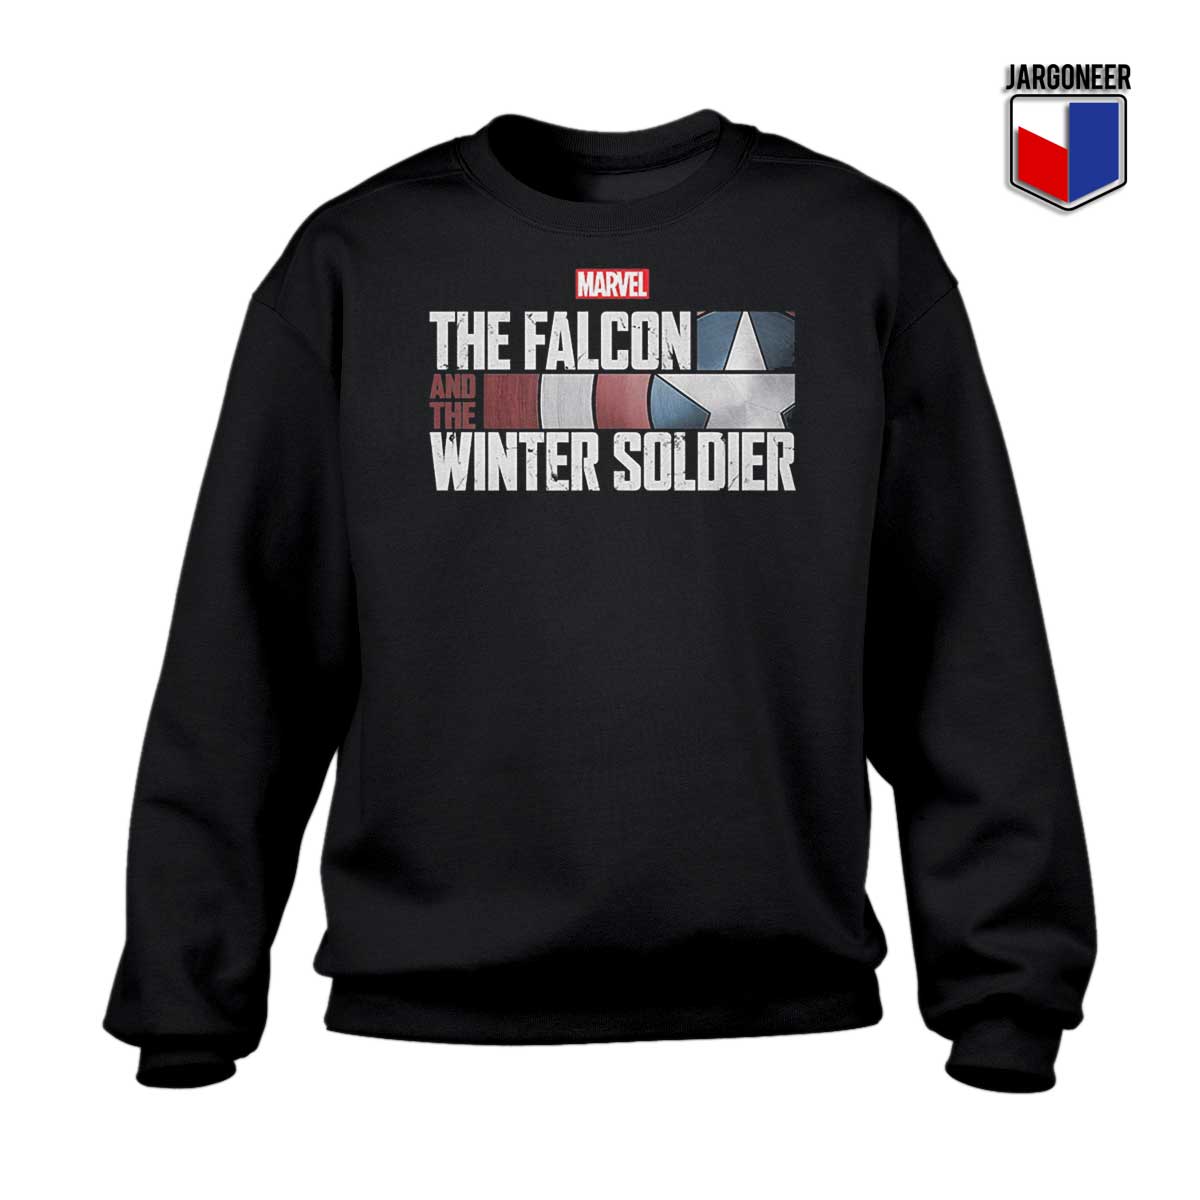 The Falcon And The Winter Soldier Sweatshirt - Shop Unique Graphic Cool Shirt Designs